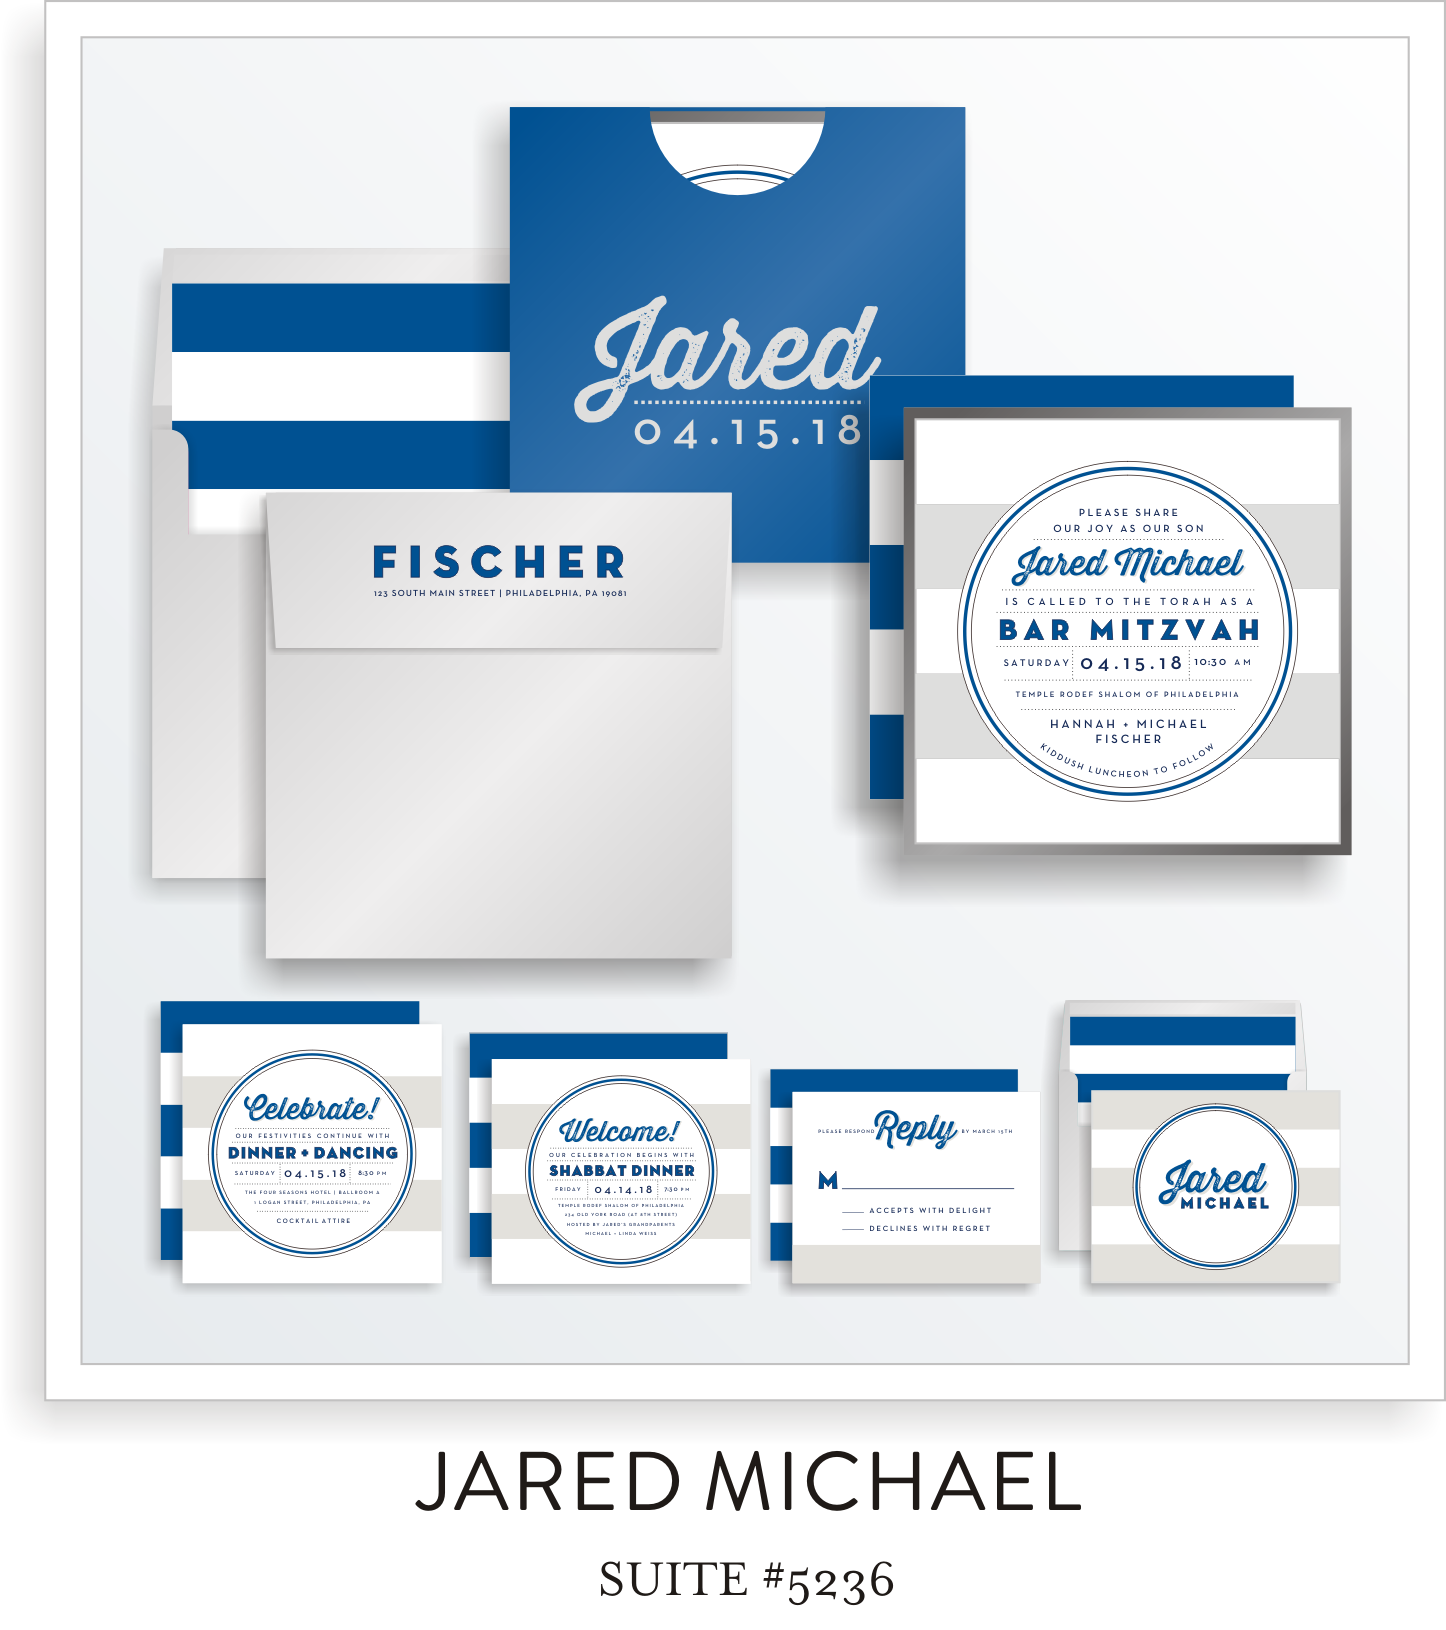 Copy of <a href=/bar-mitzvah-invitations-5236>Suite Details→</a><strong><a href=/jared-michael-in-colors>see more colors→</a></strong>